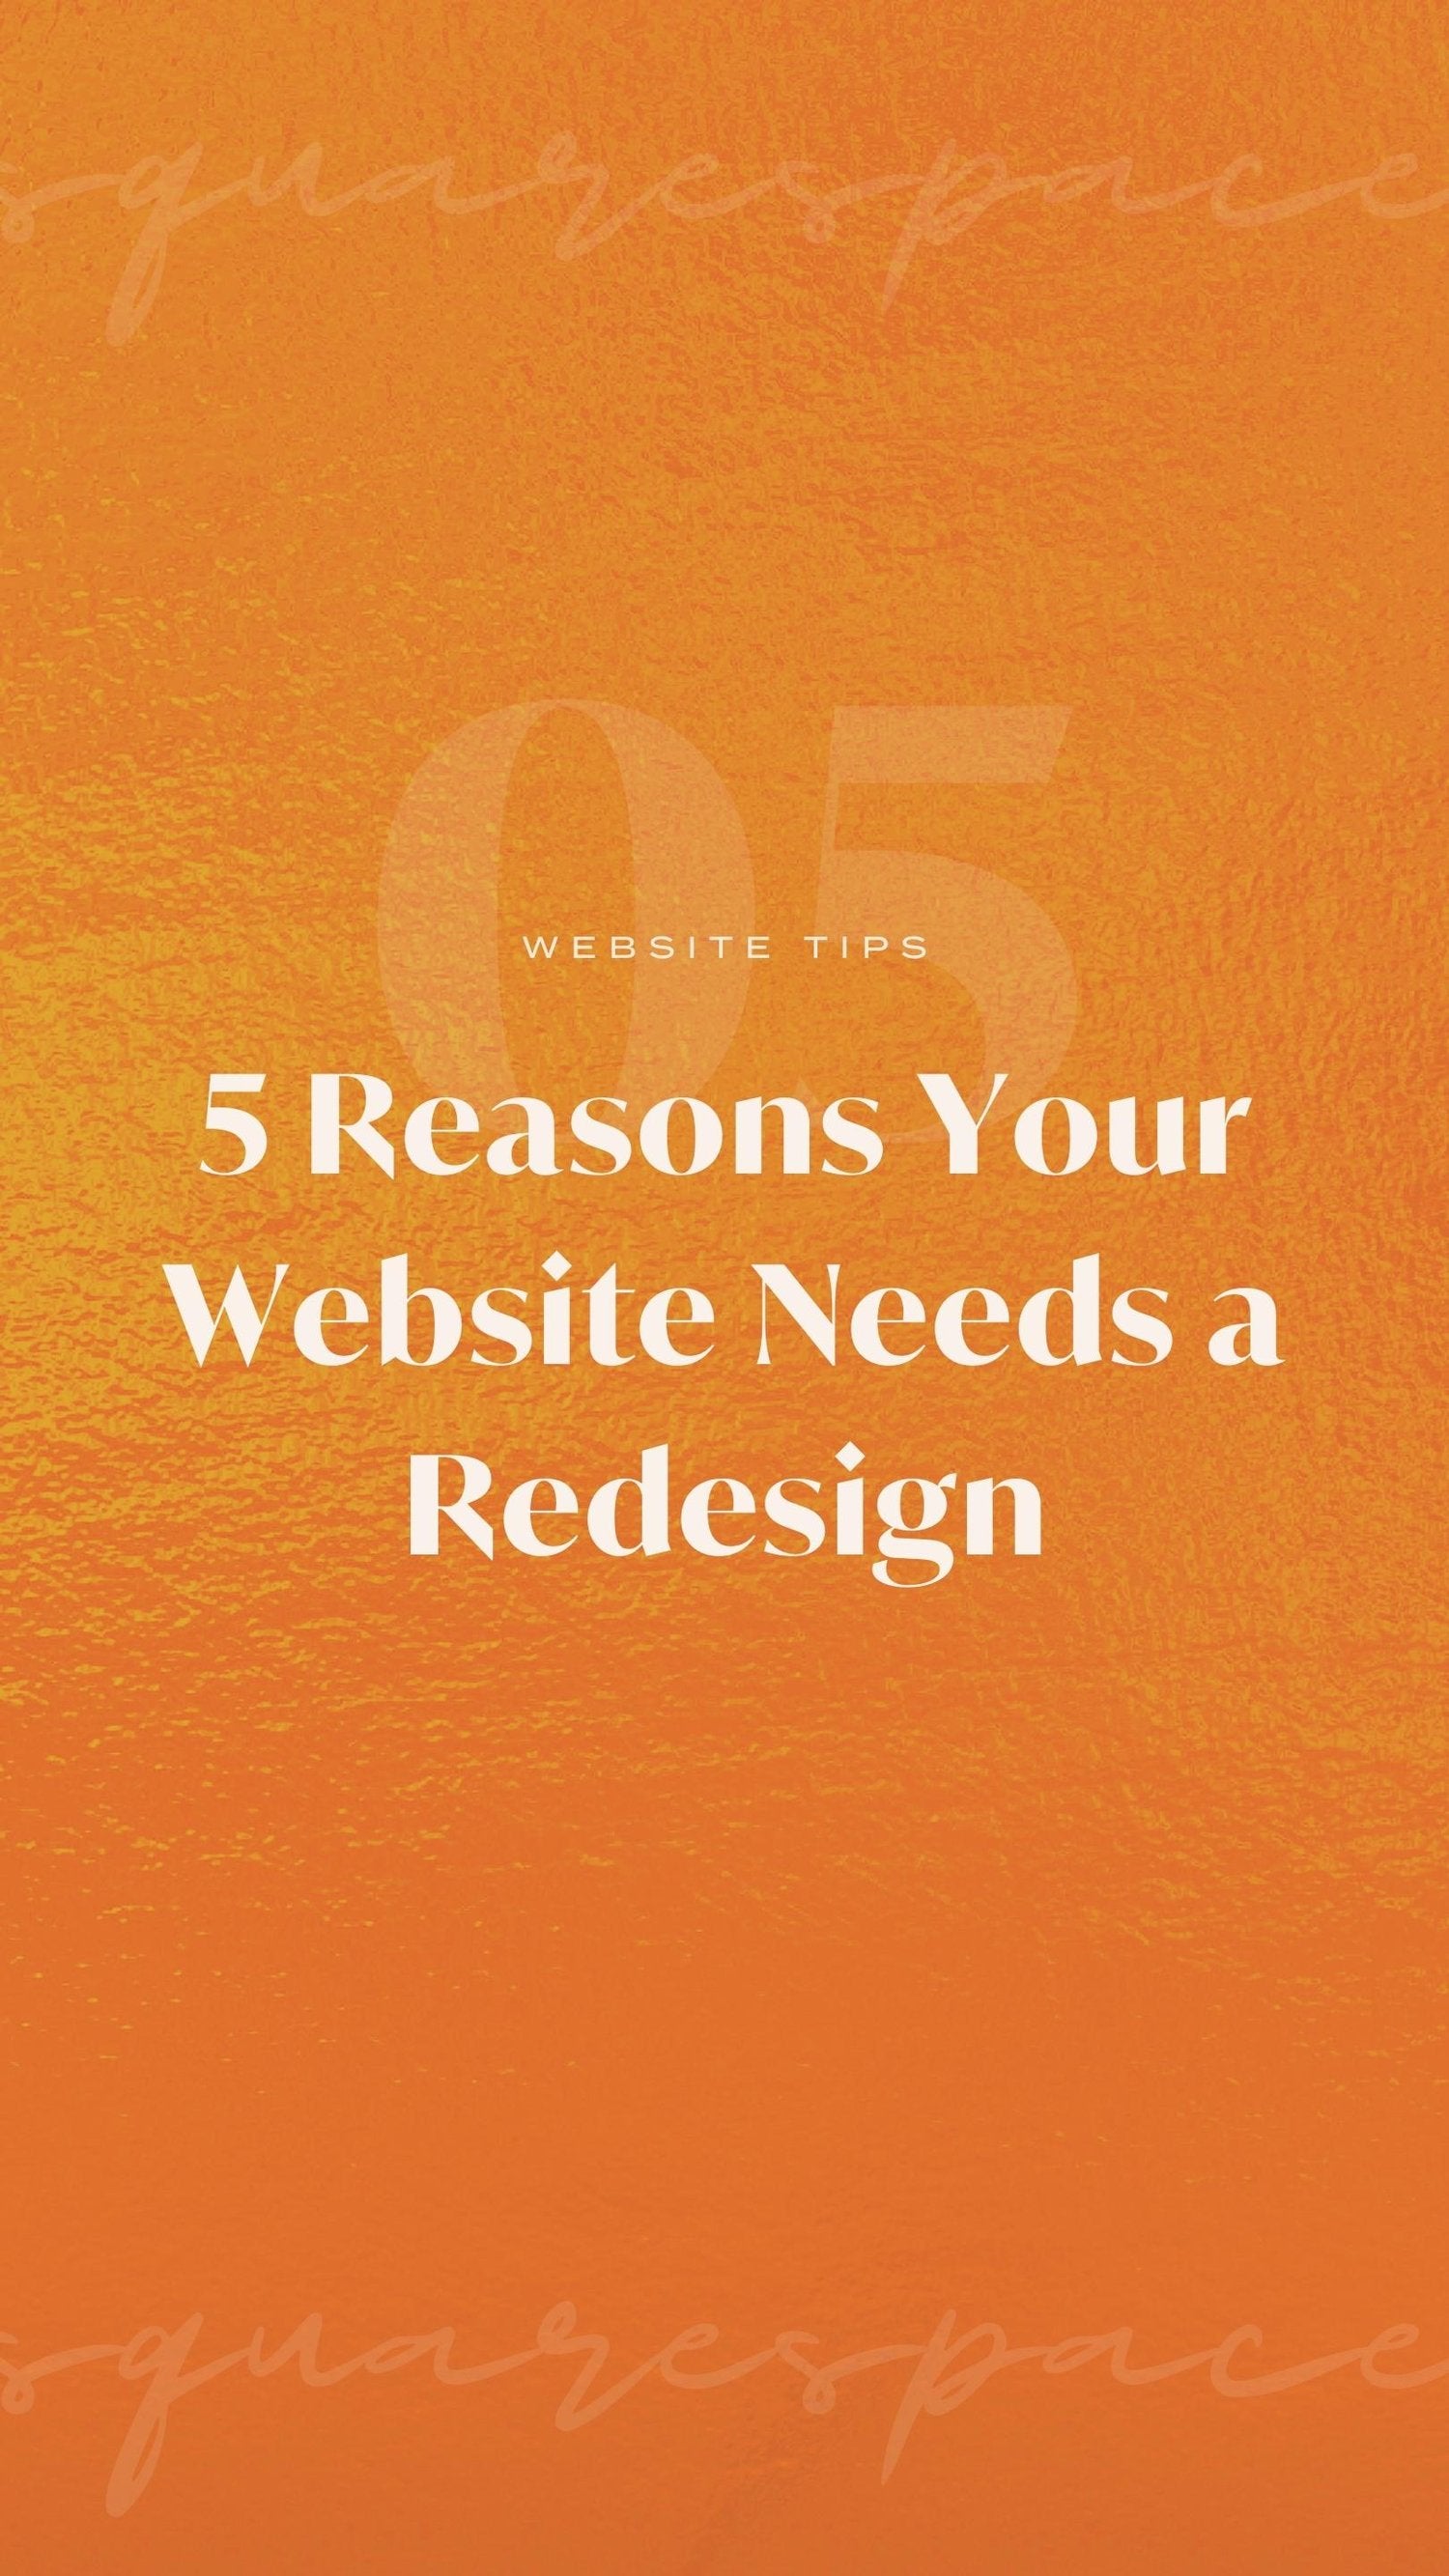 5 Reasons Your Website Needs a Redesign Now